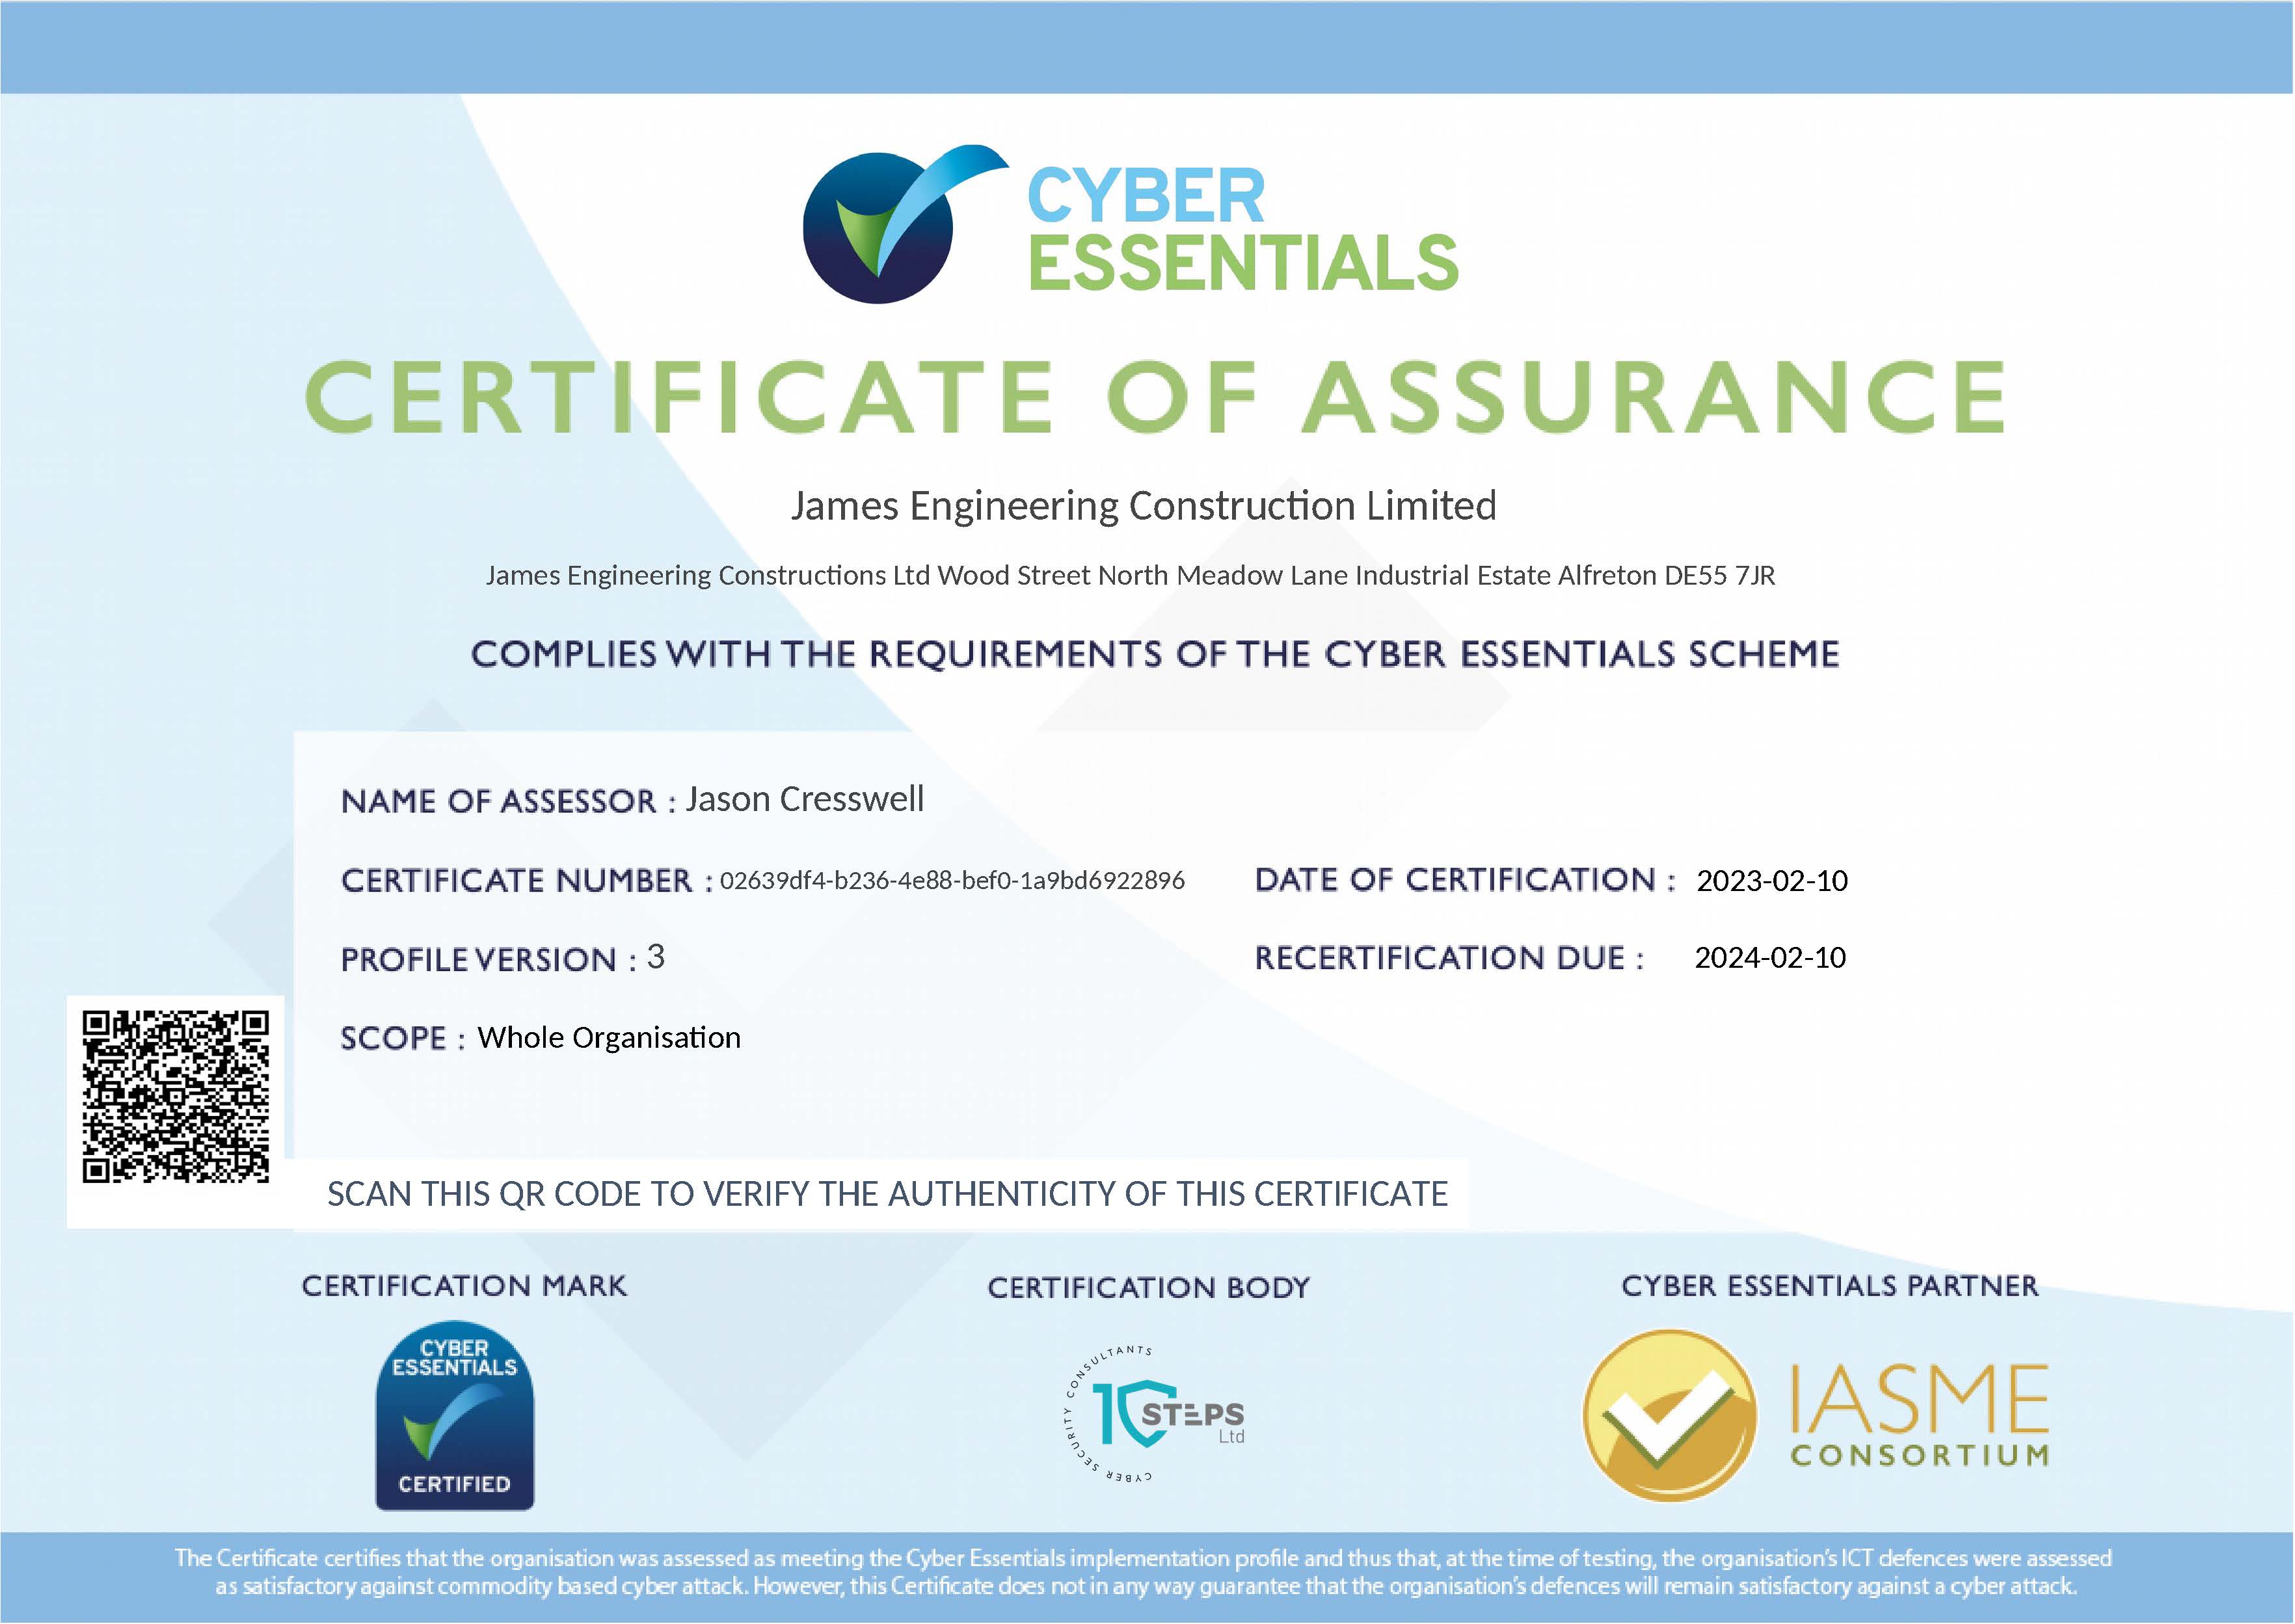 Cyber Essentials Accredited (Section 1)